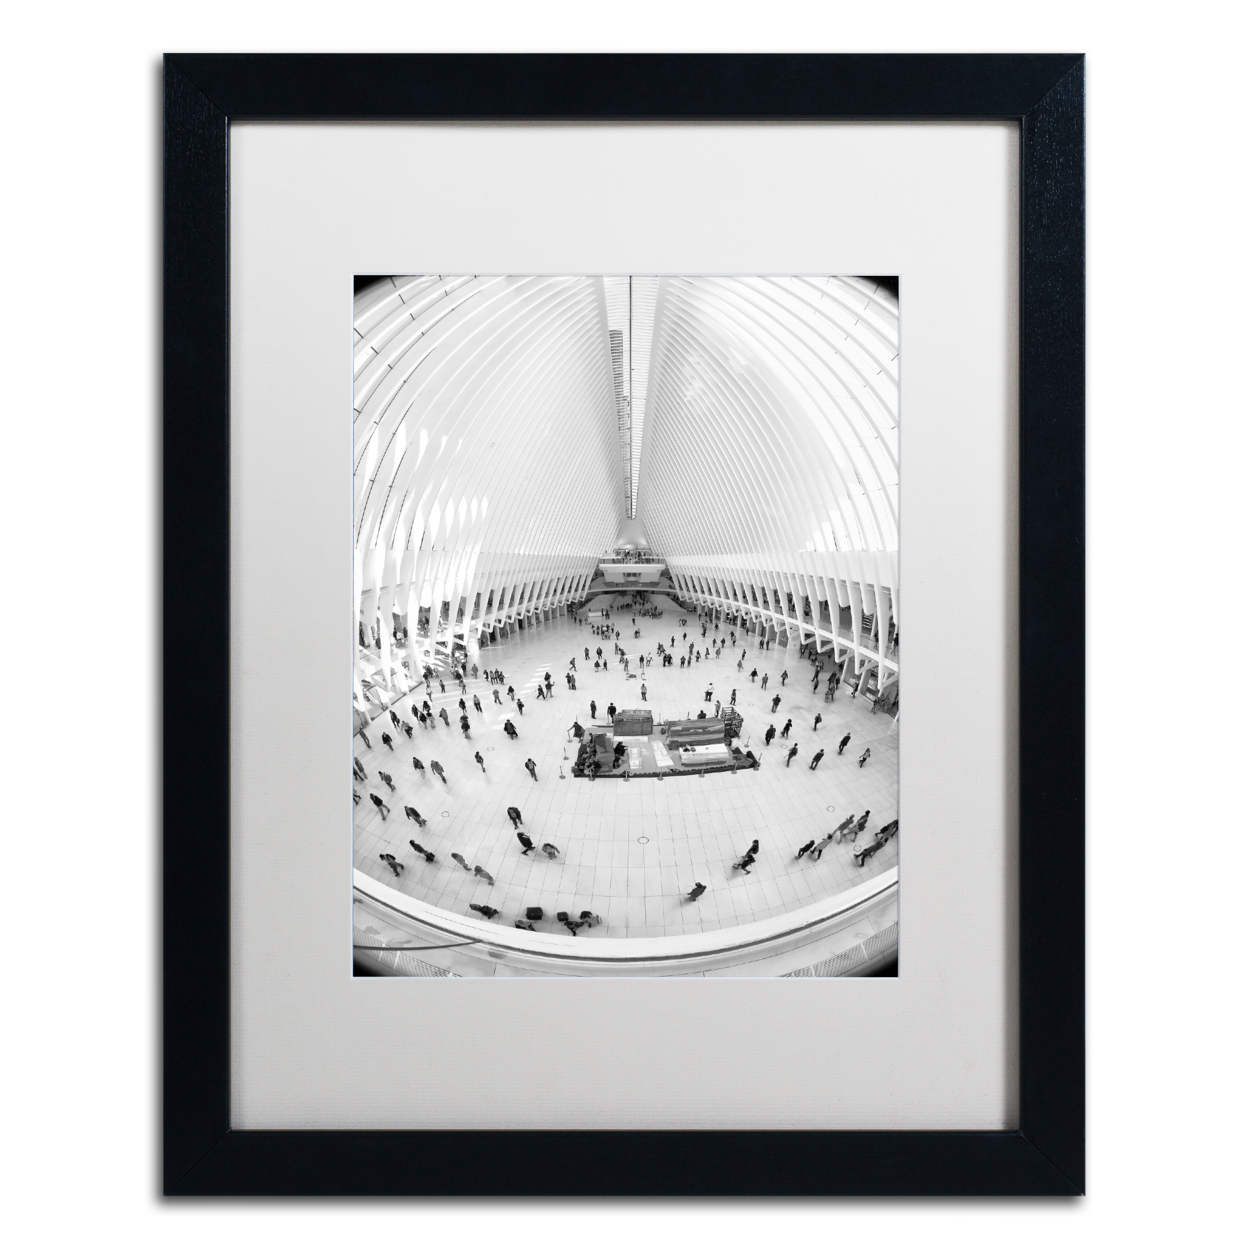 CATeyes 'Oculus WTC' Black Wooden Framed Art 18 X 22 Inches